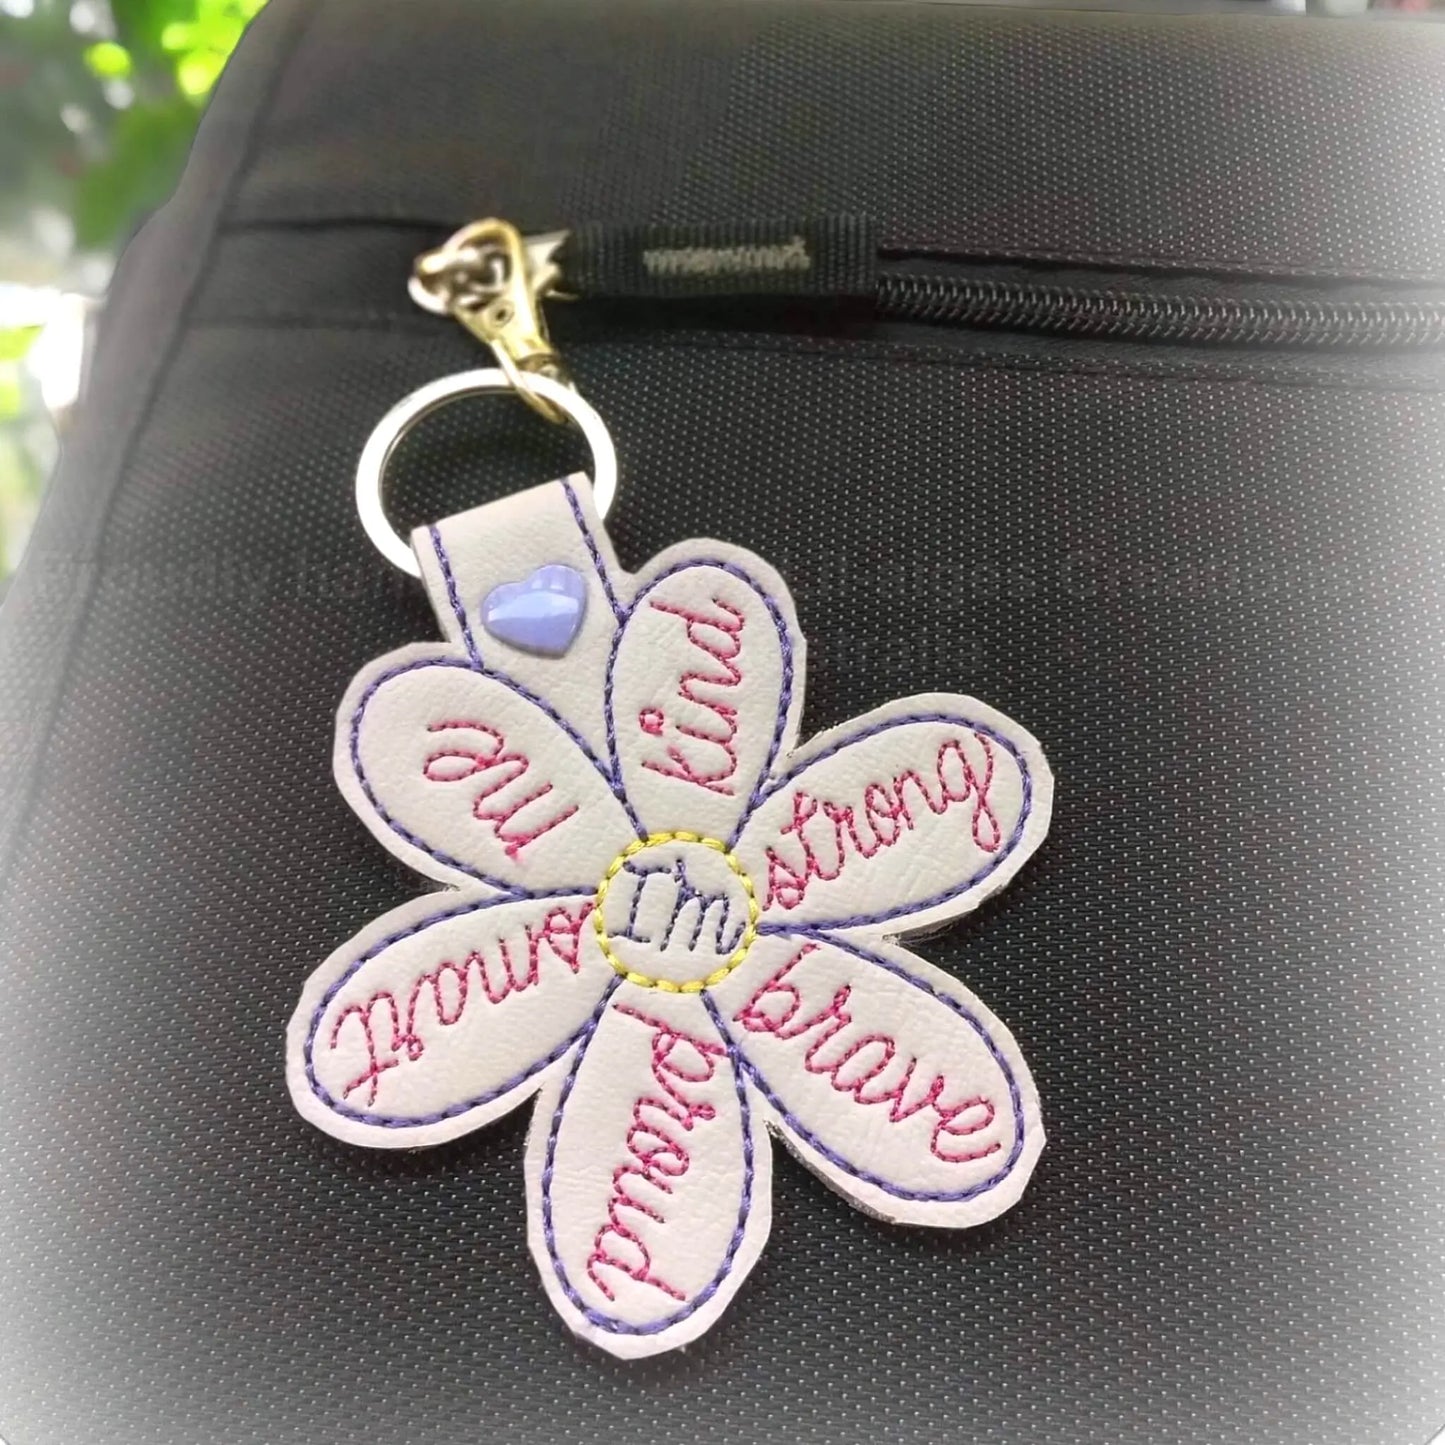 Flower Power for Your Pocket: Get Your Affirmation Fix with Our Aussie-Made Vinyl Keychains - Image #5